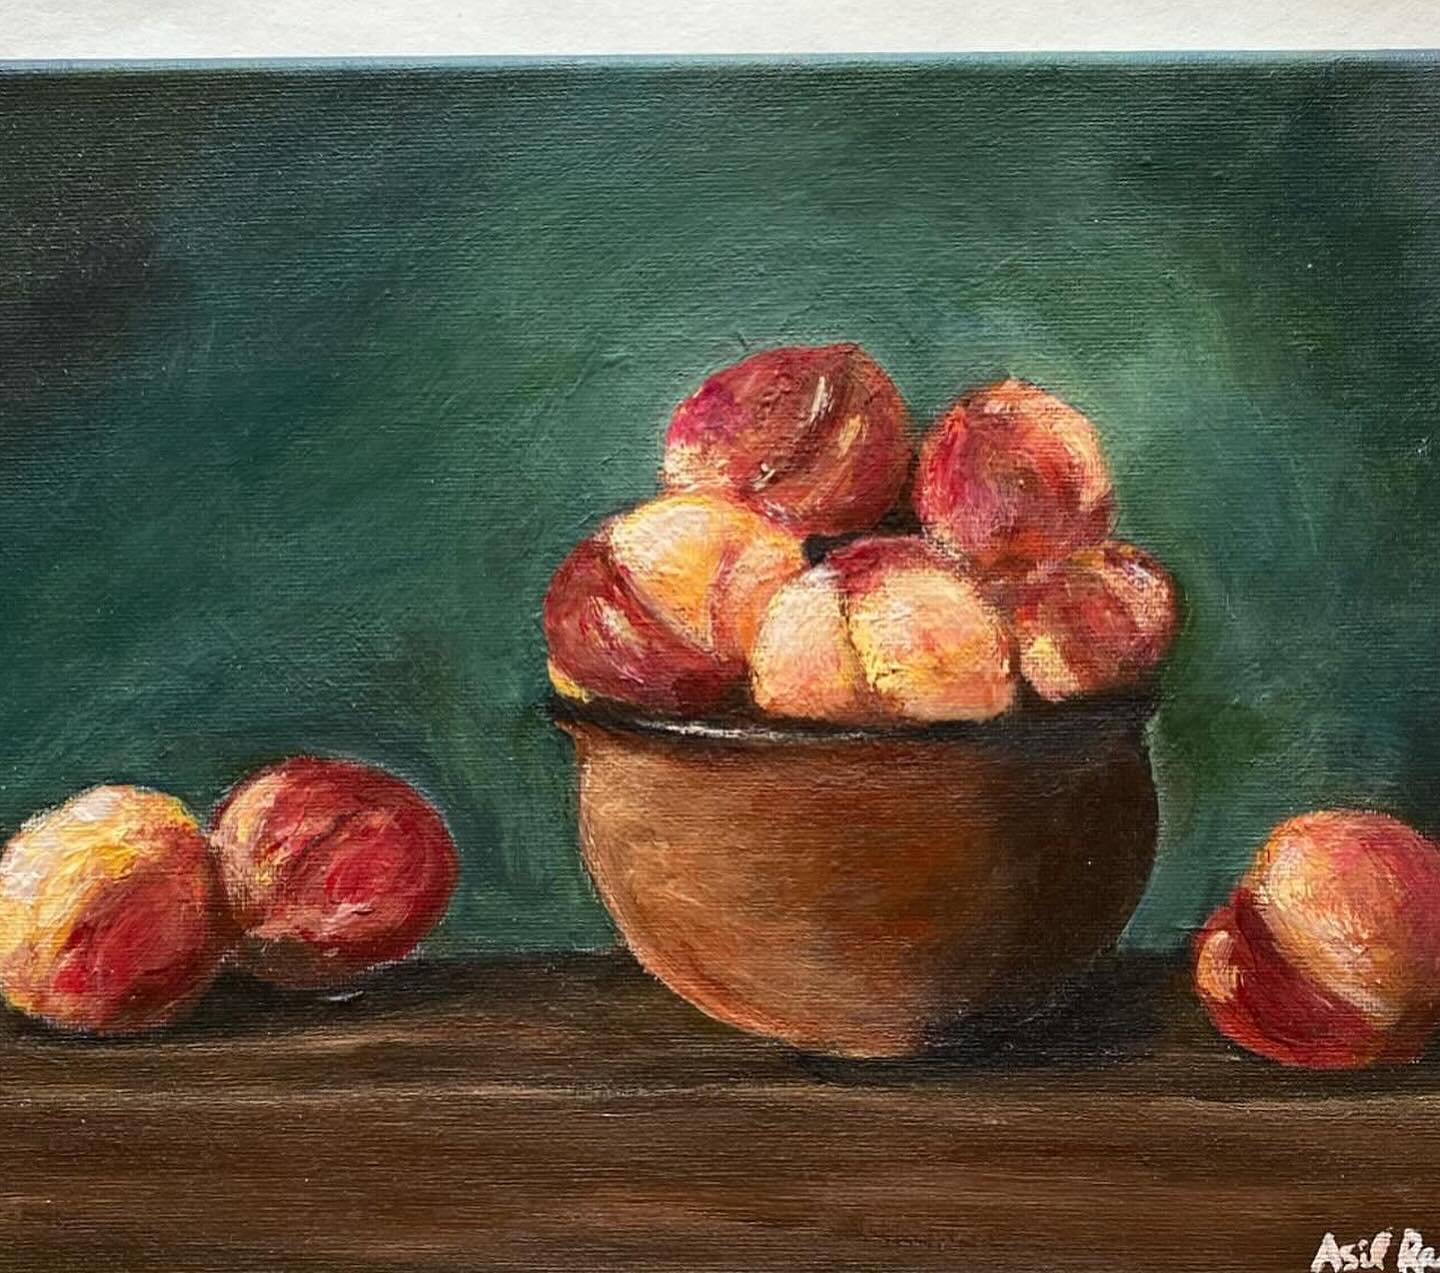 My &ldquo;Painting Small and Often&rdquo; collection is now available in my shop. Link in bio. This is a series of 7 small studies in acrylic in 9&rdquo;x12&rdquo; canvasses. :  1- Still Life with Peaches, acrylic on stretched canvas, 9&rdquo; x 12&r